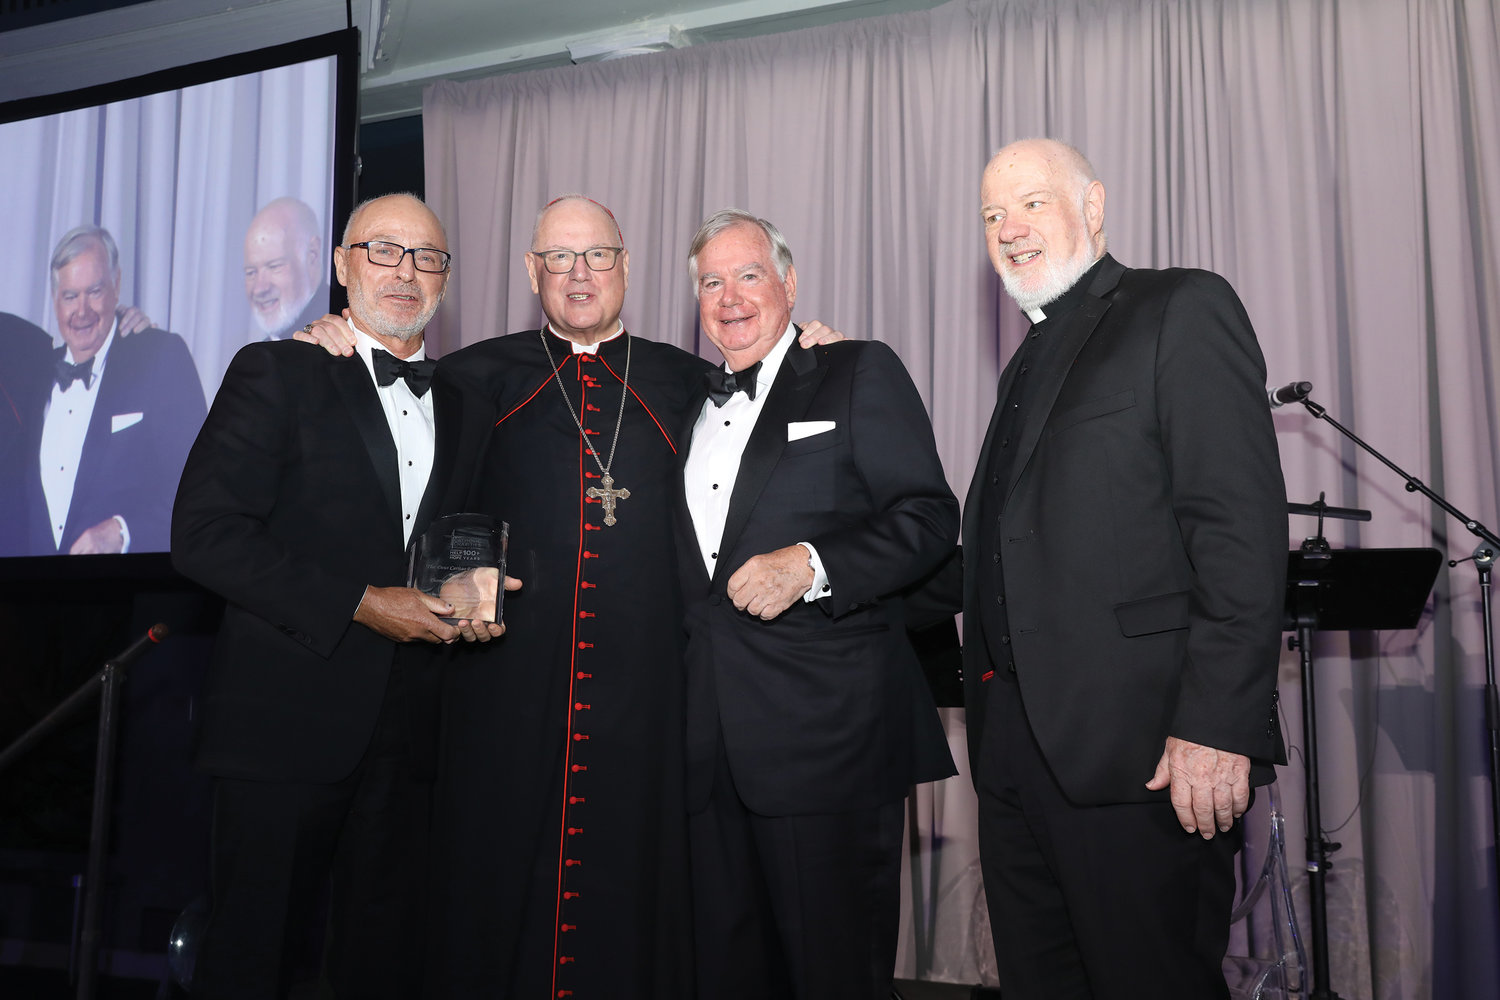 Todd Gibbons, CEO of BNY Mellon, left, receives the Deus Caritas Est Award from Cardinal Dolan, who was joined by Eugene McQuade, chair of the board of archdiocesan Catholic Charities, and Msgr. Kevin Sullivan, executive director of archdiocesan Catholic Charities.